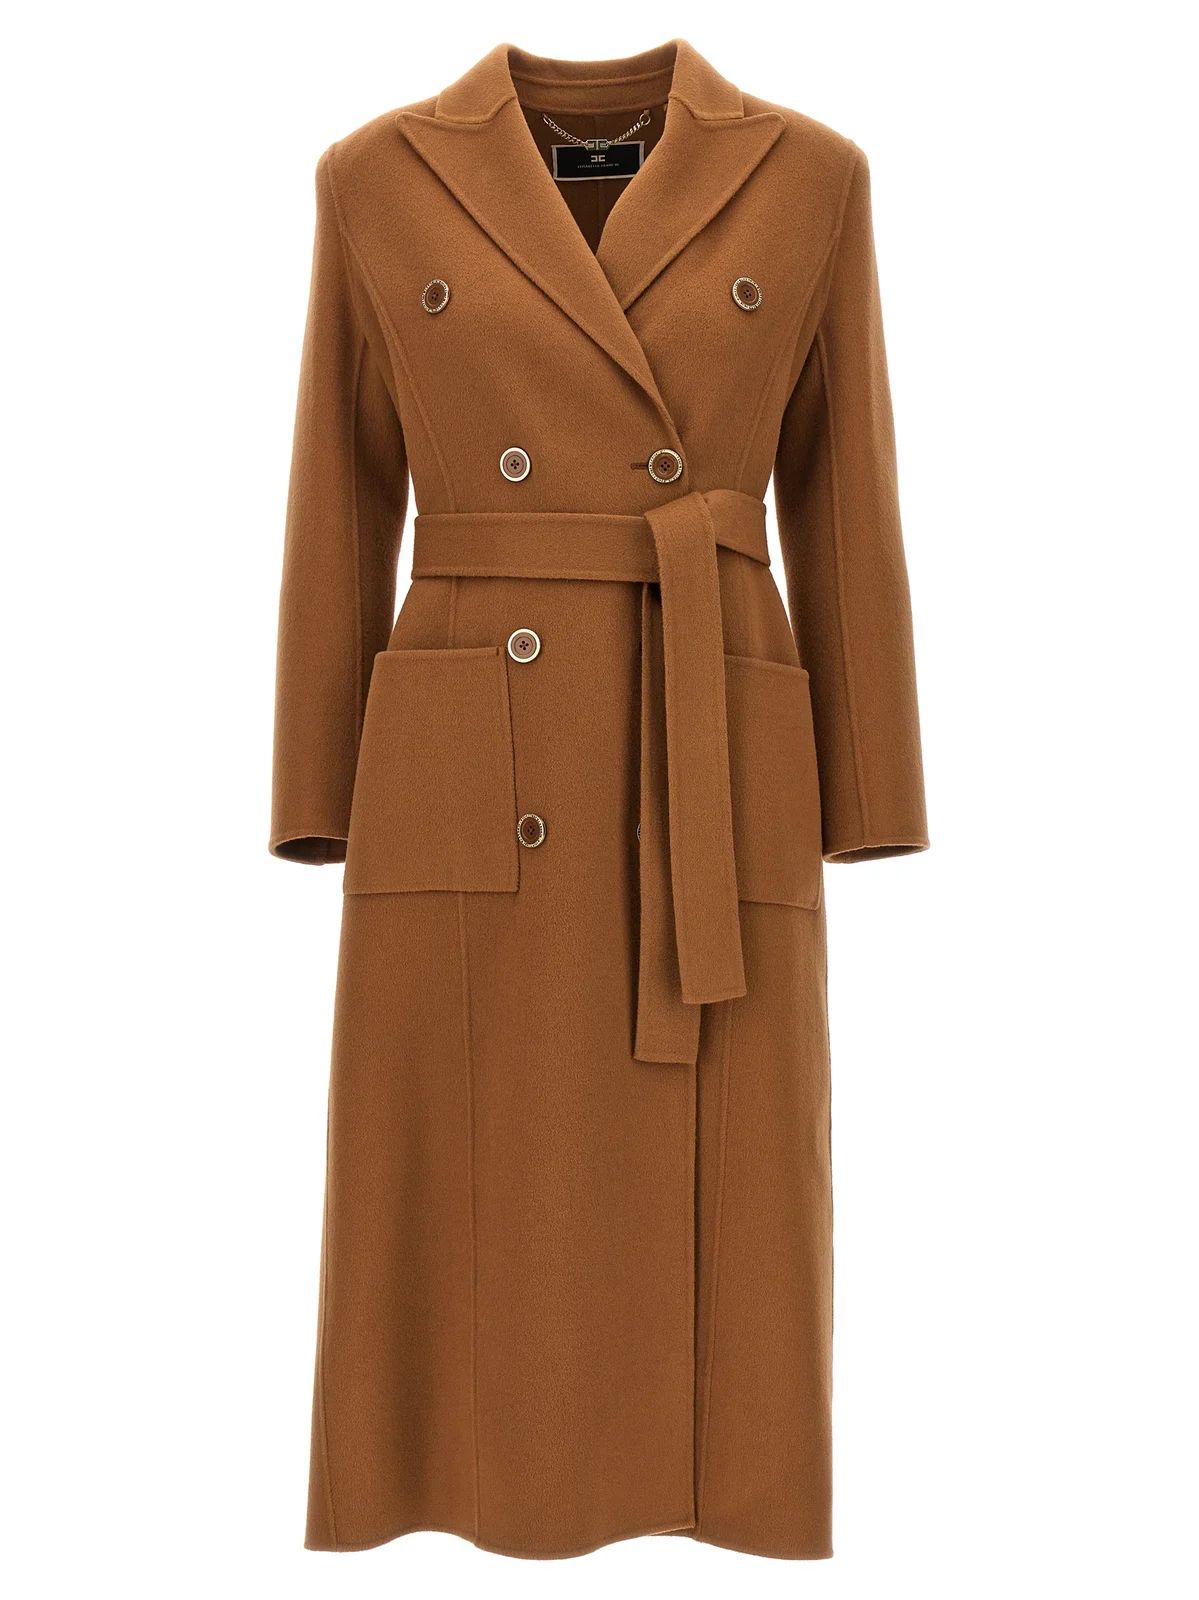 Elisabetta Franchi Double-Breasted Belted Coat | Cettire Global